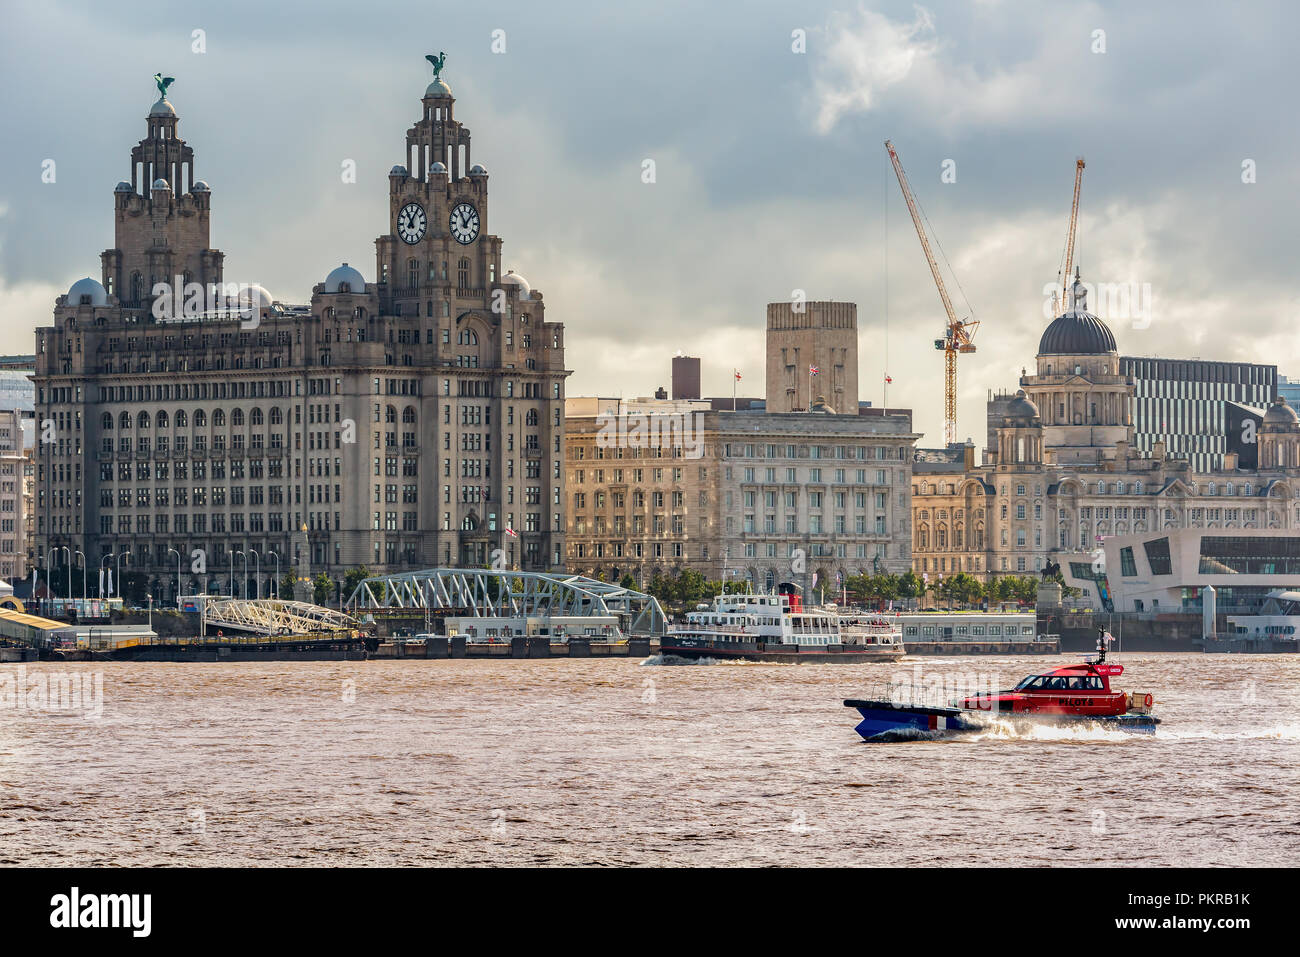 Liverpool pilot launch Razorbill with Liverpool waterfront. Stock Photo